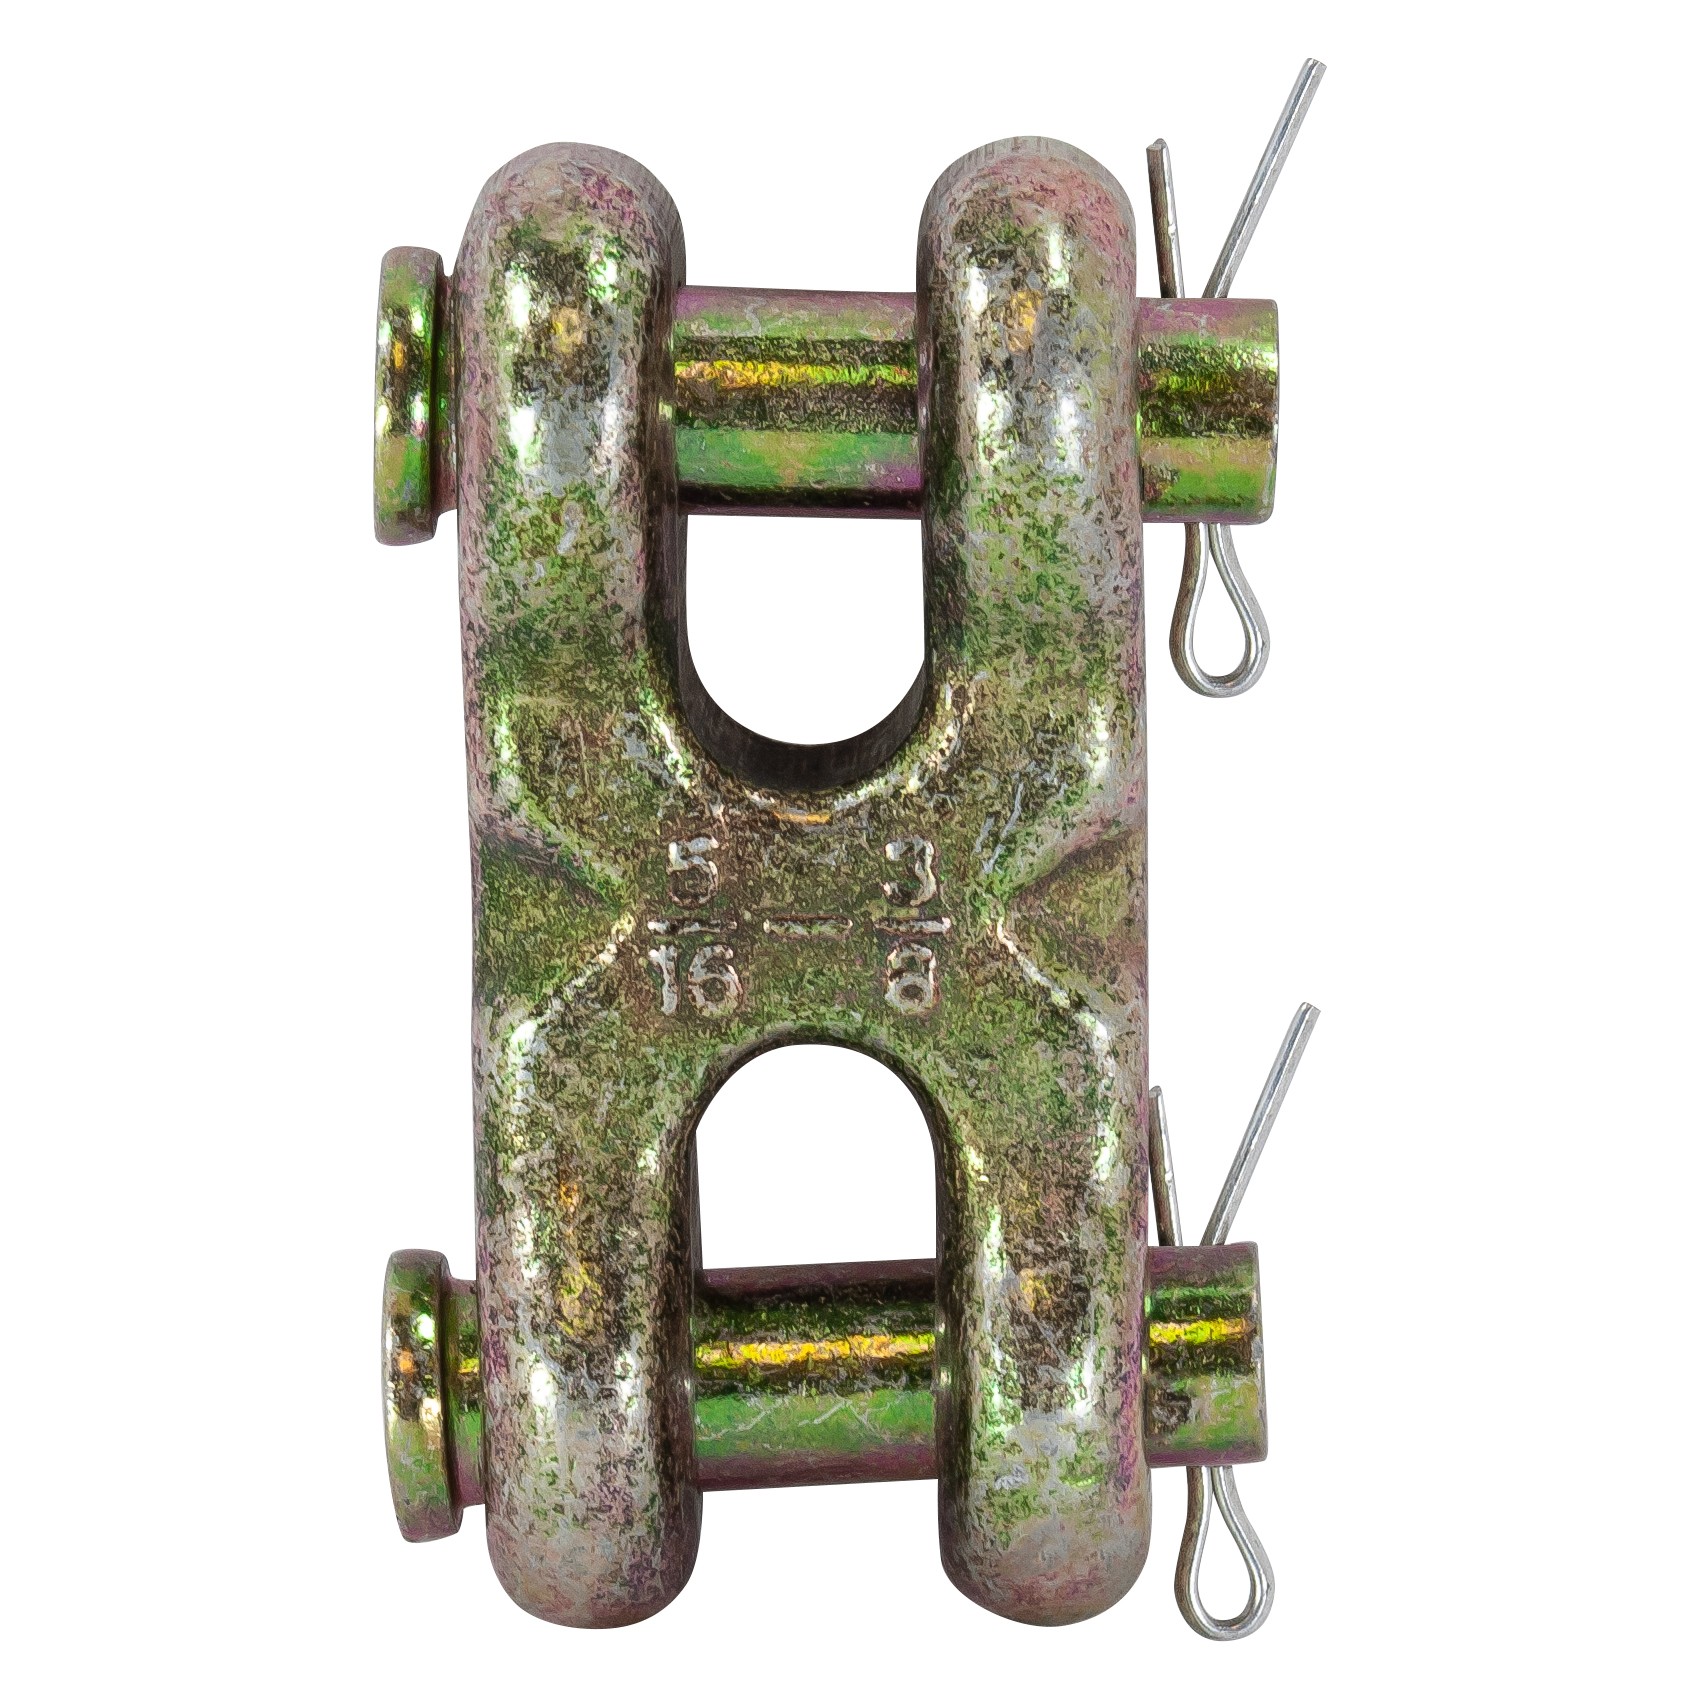 Alloy Double Clevis Links - 3/8"